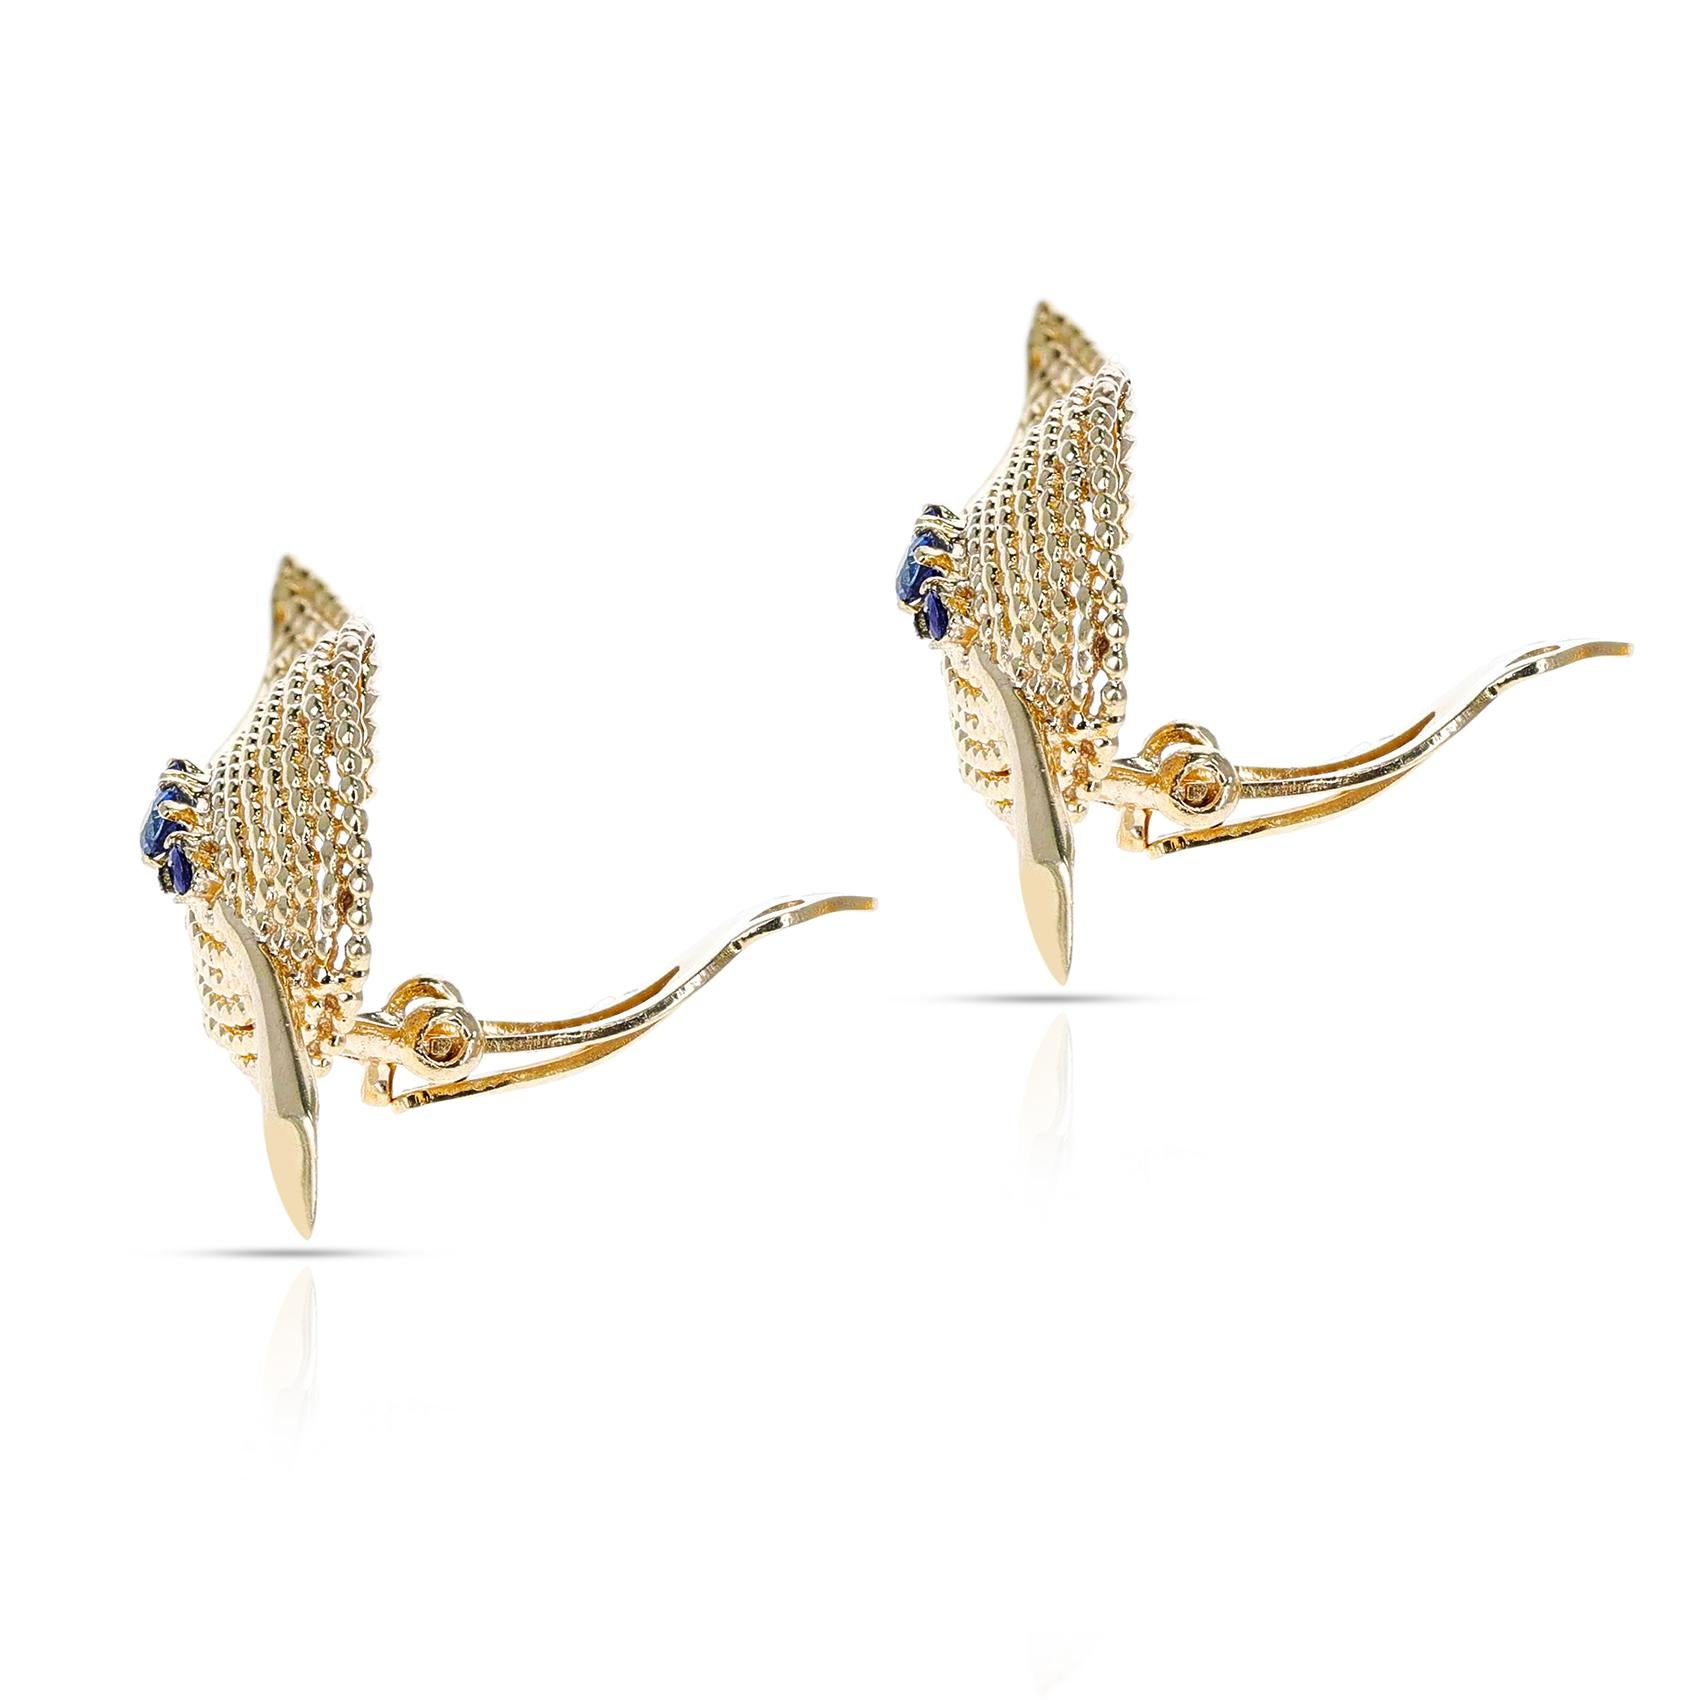 Tiffany & Co. Leaf 14k Gold and Sapphire Earrings, with Org. Box For Sale 1